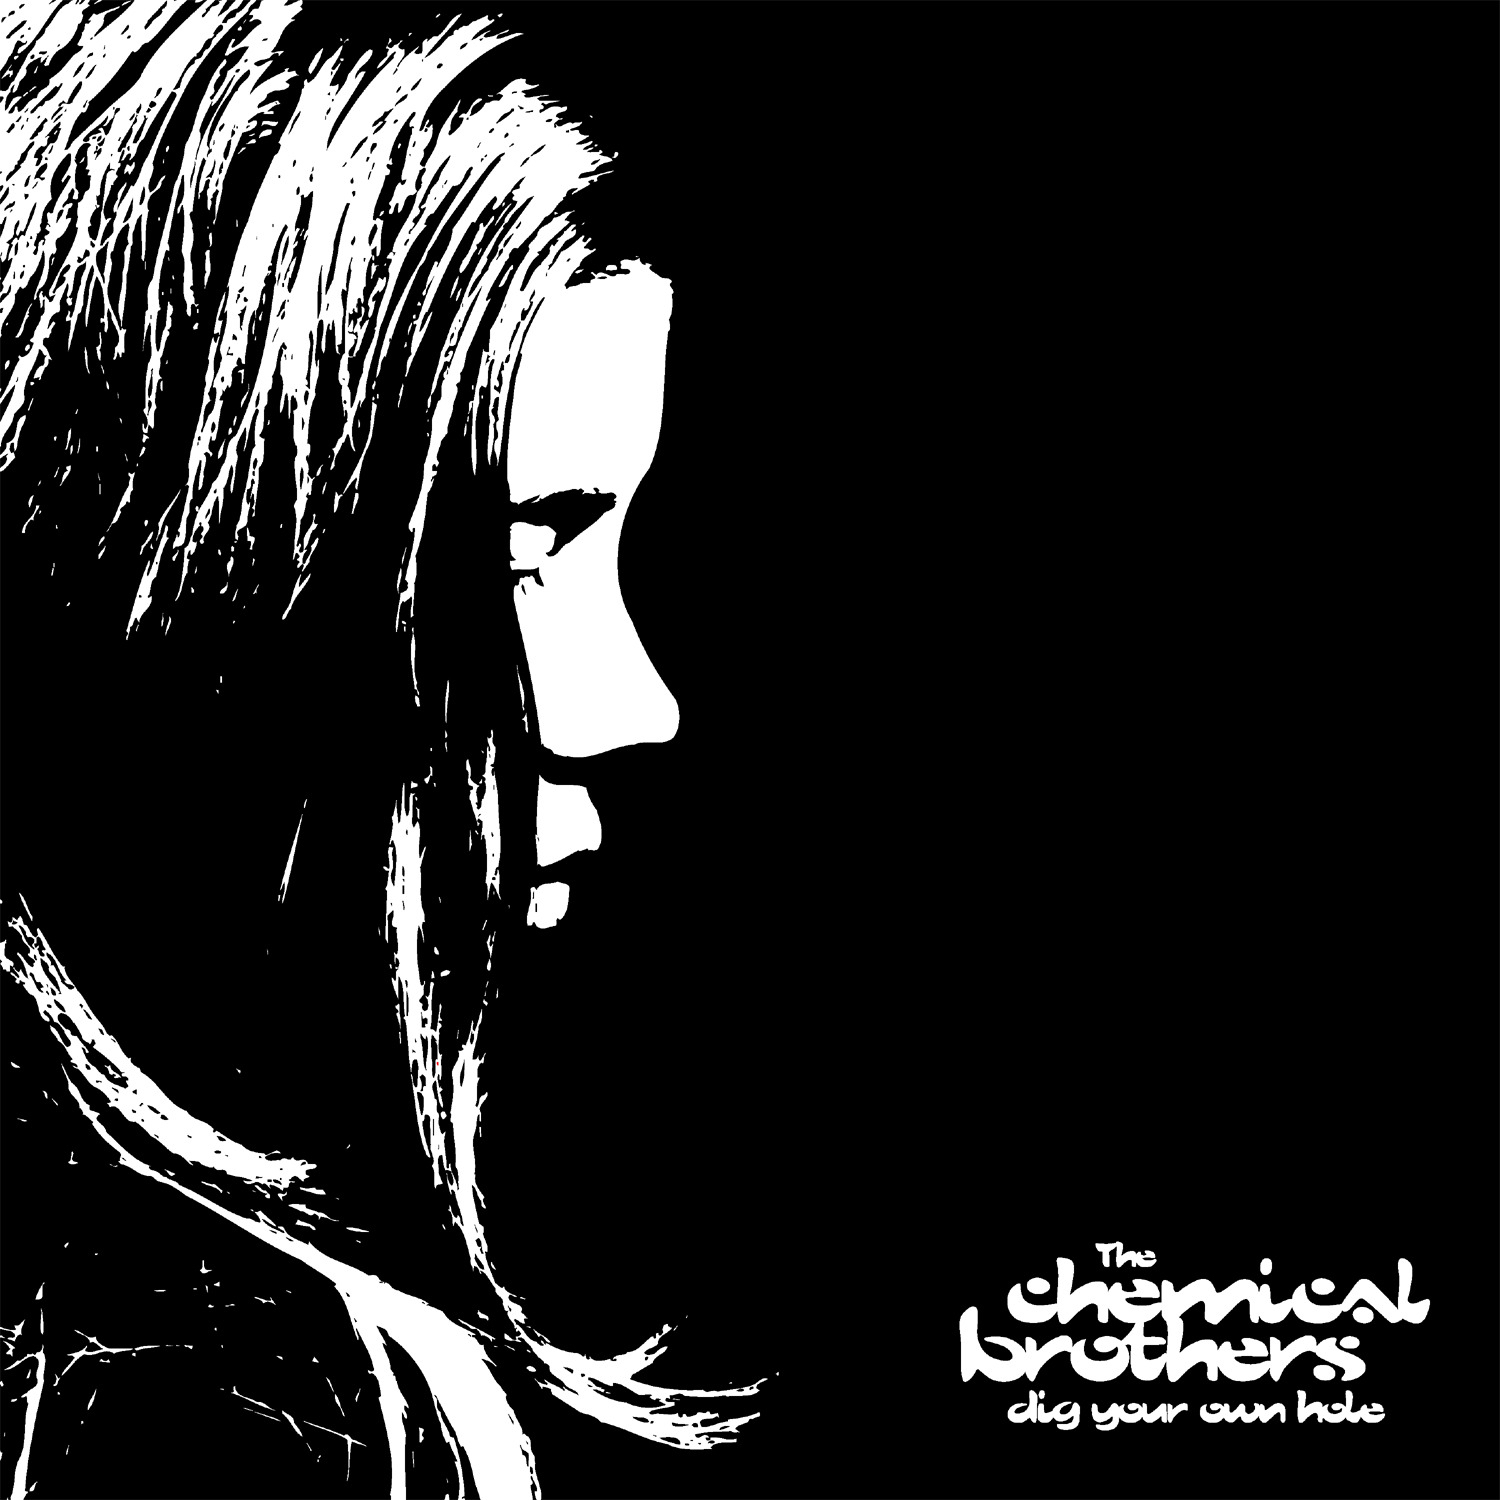 [Vinyl Rip/FLAC][24bit/96khz] Dig Your Own Hole - The Chemical Brothers